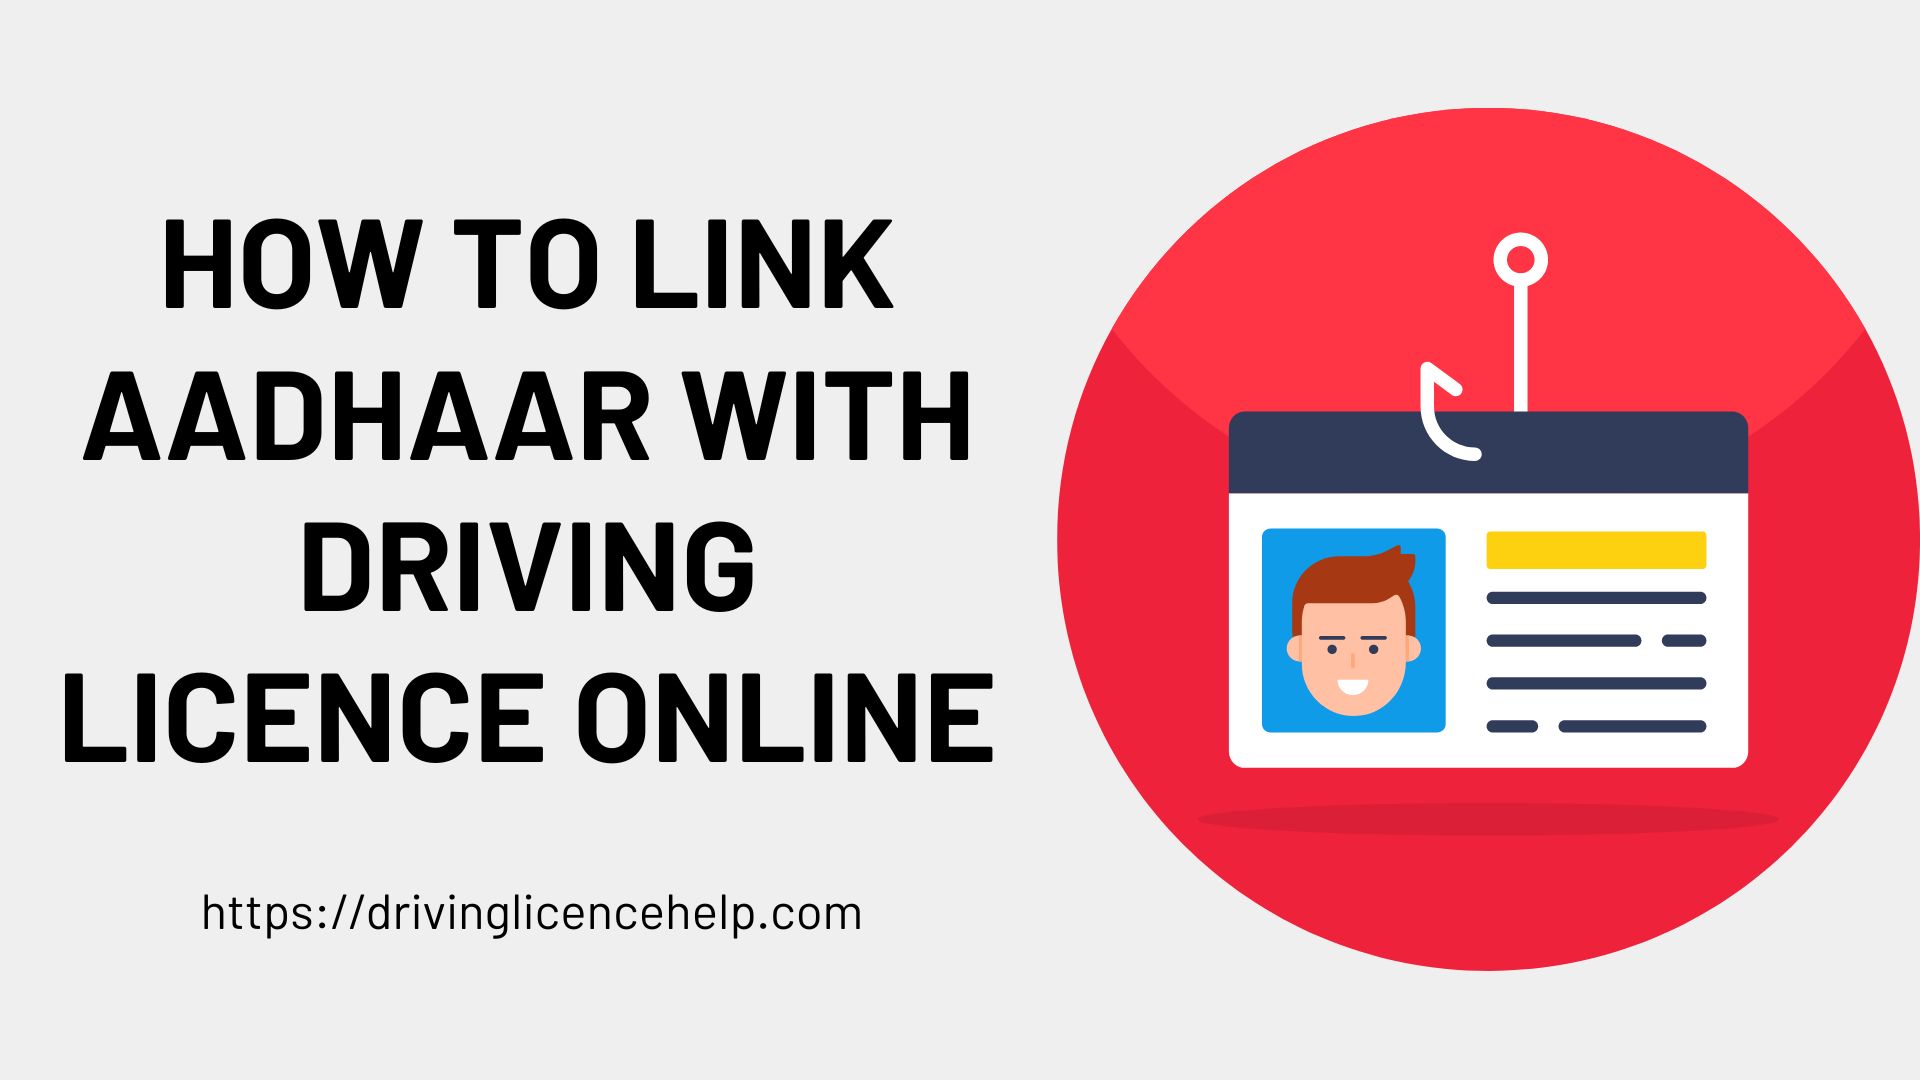 How to Link Aadhaar with Driving Licence Online